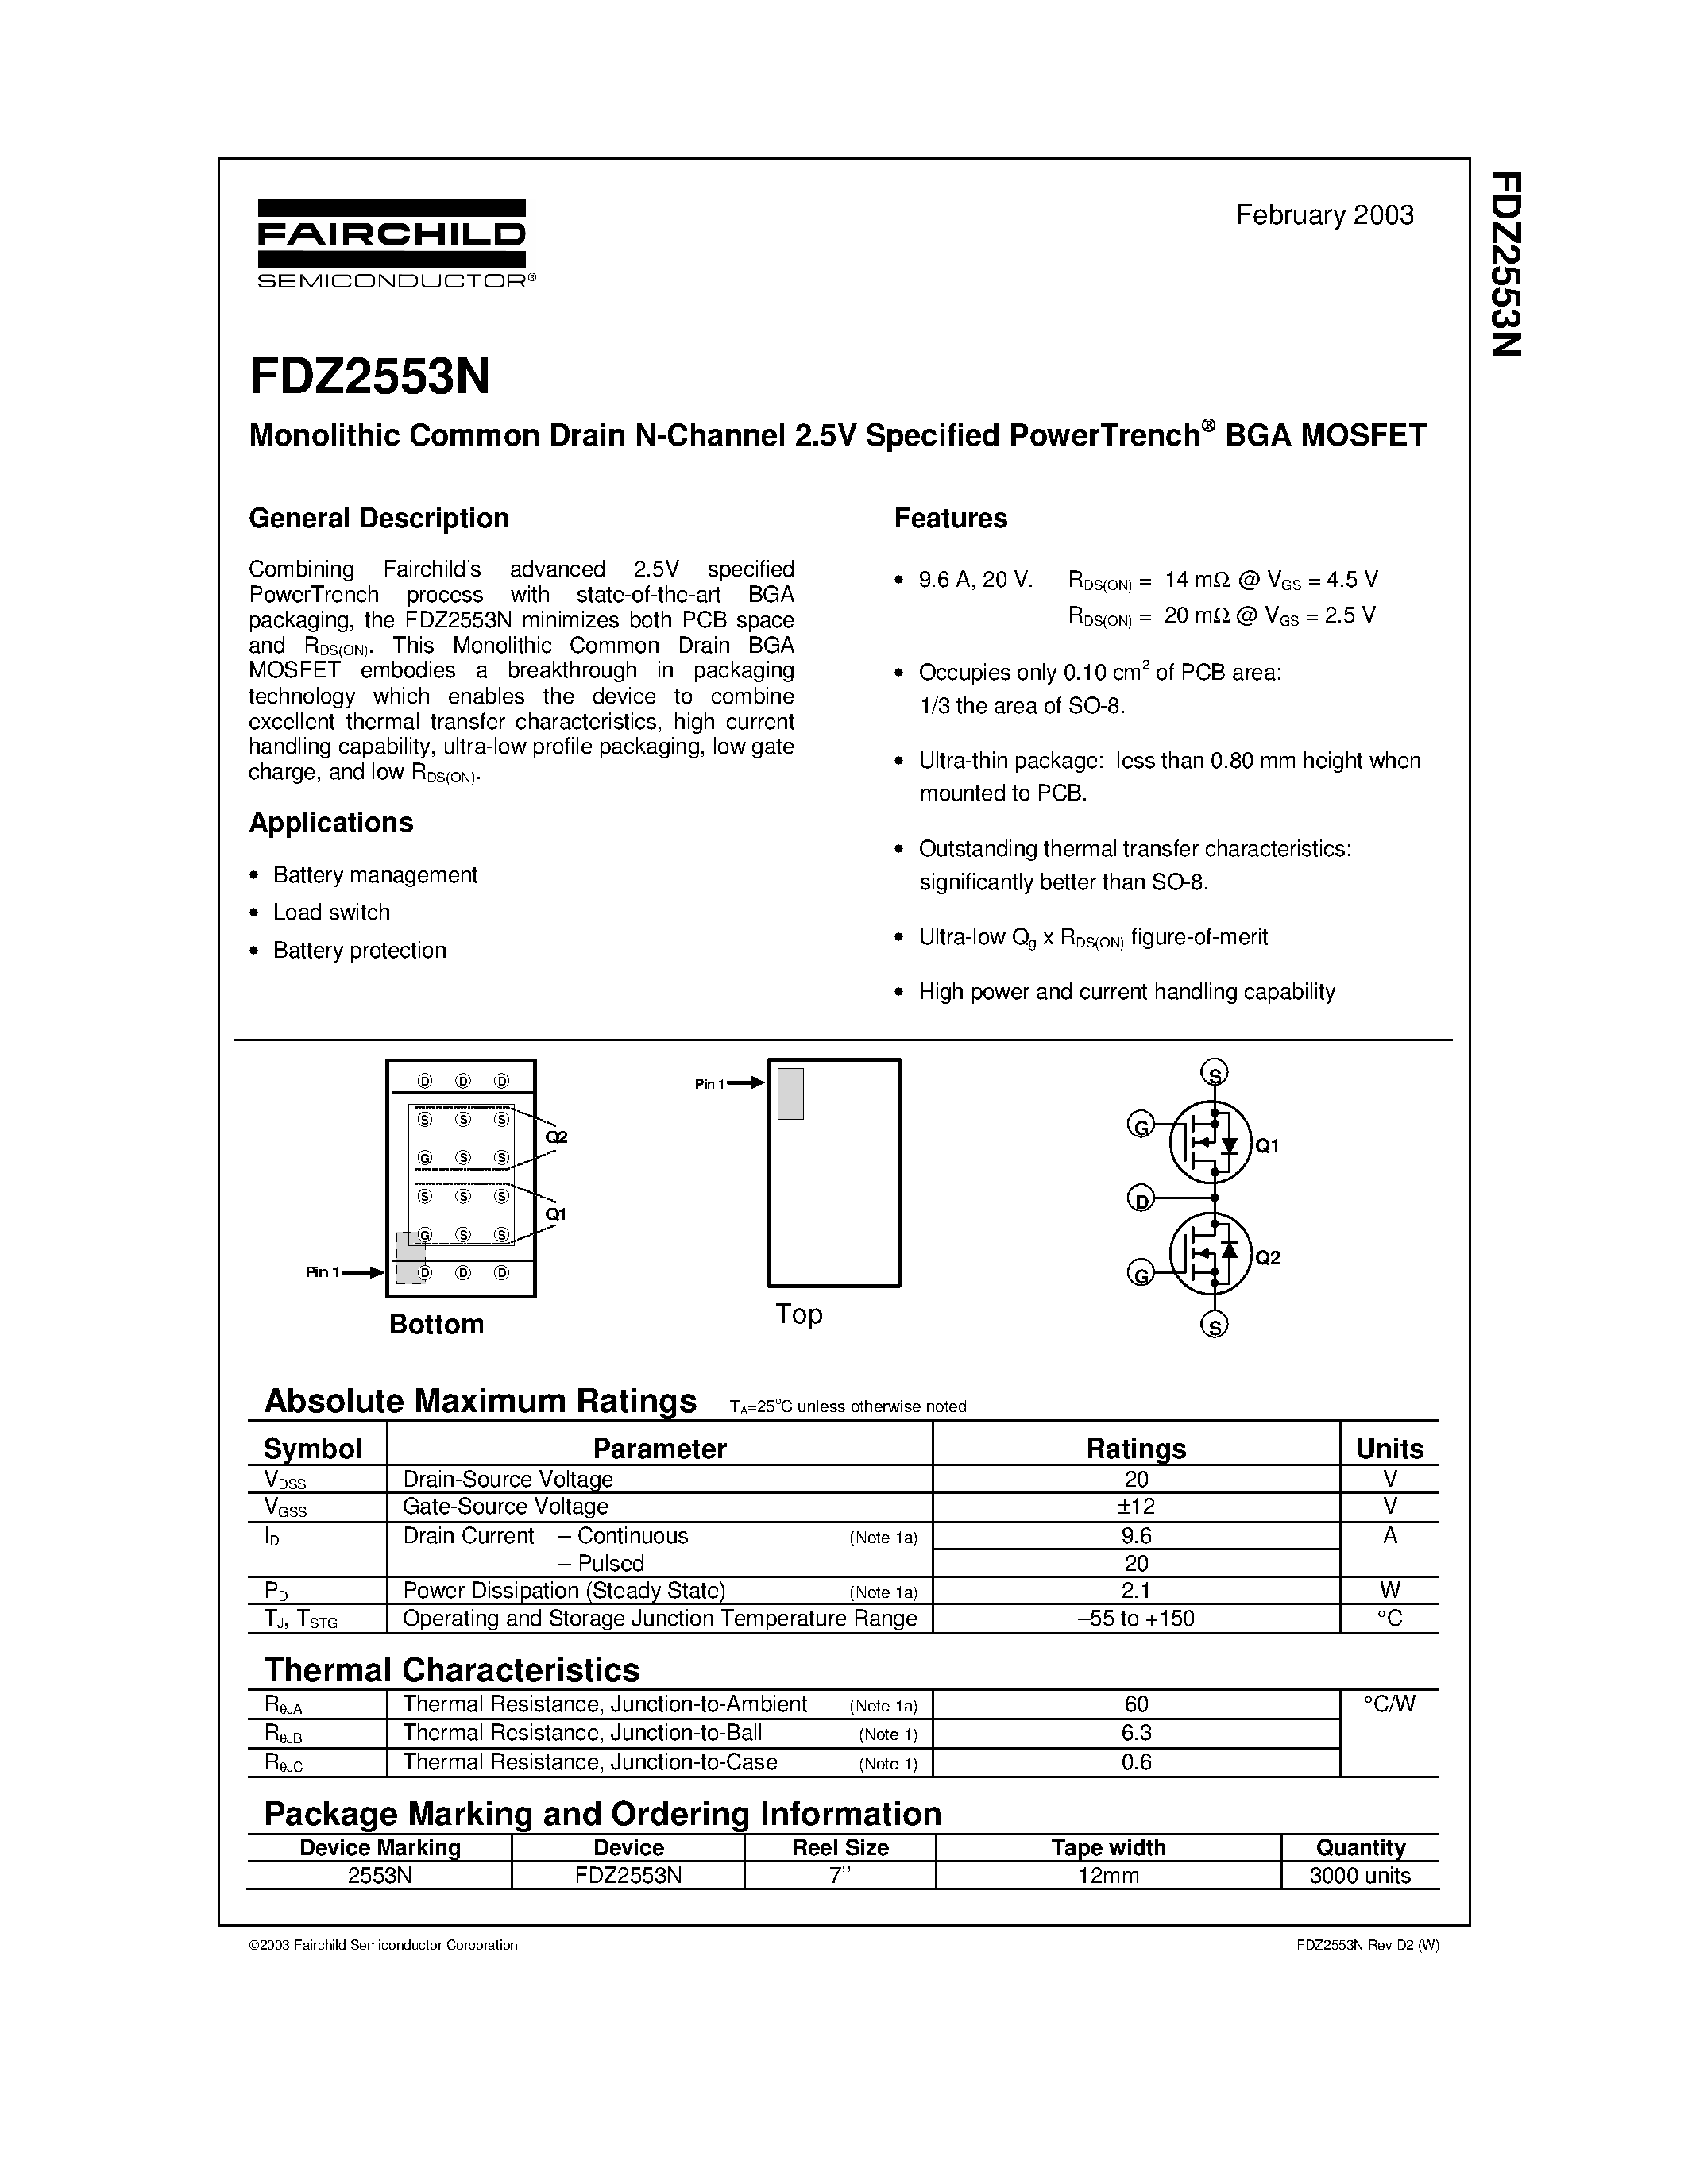 Datasheet FDZ2553N - Monolithic Common Drain N-Channel 2.5V Specified PowerTrench page 1